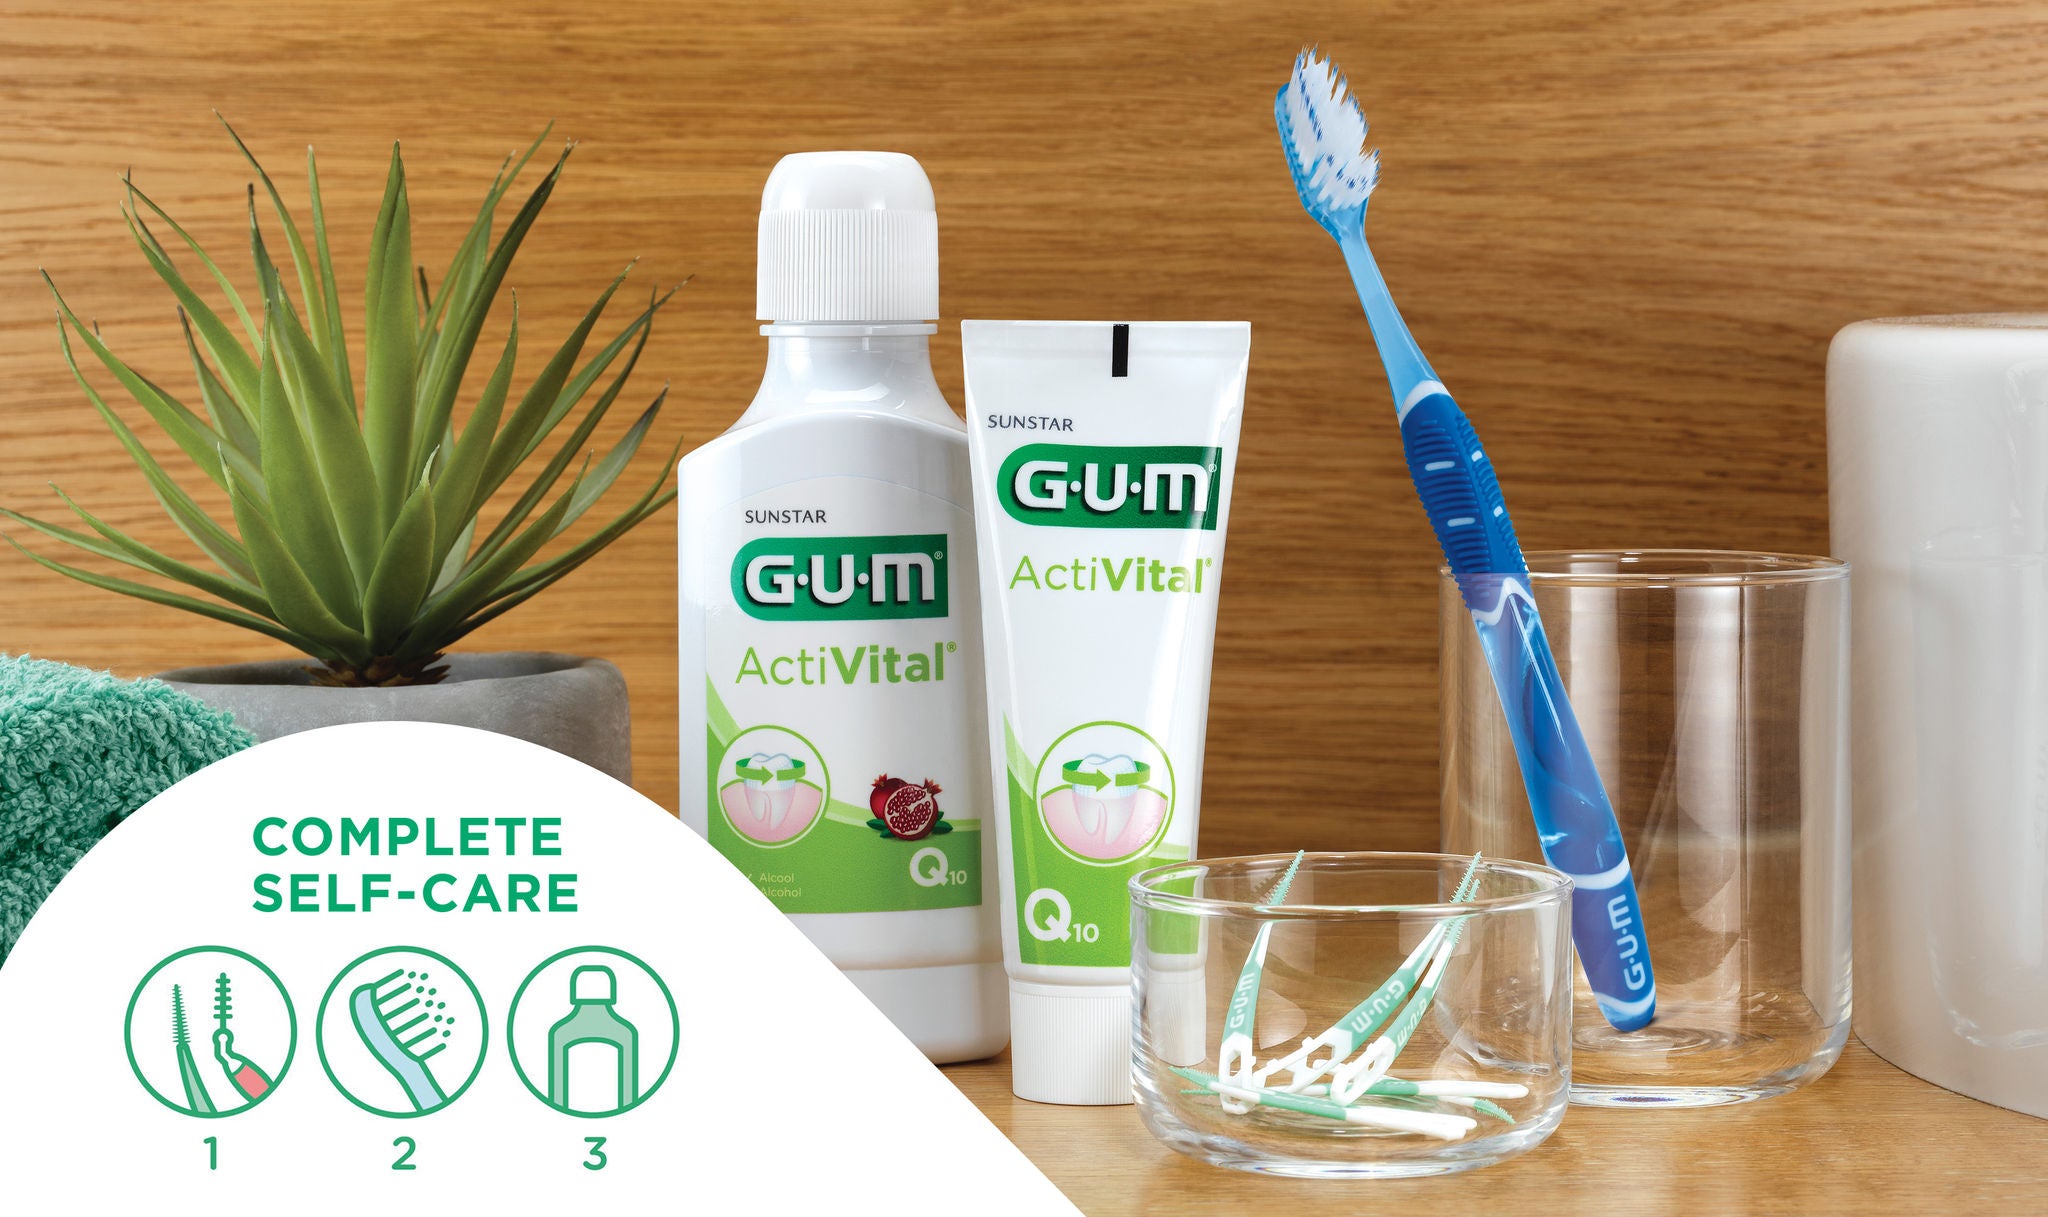 GUM SOFT-PICKS Interdental brush, the ActiVital range and the GUM PRO Toothbrush into a glass for a complete self-care following the 3 steps of oral care routine (Cleaning between teeth, toothbrushing and mouthwashing).